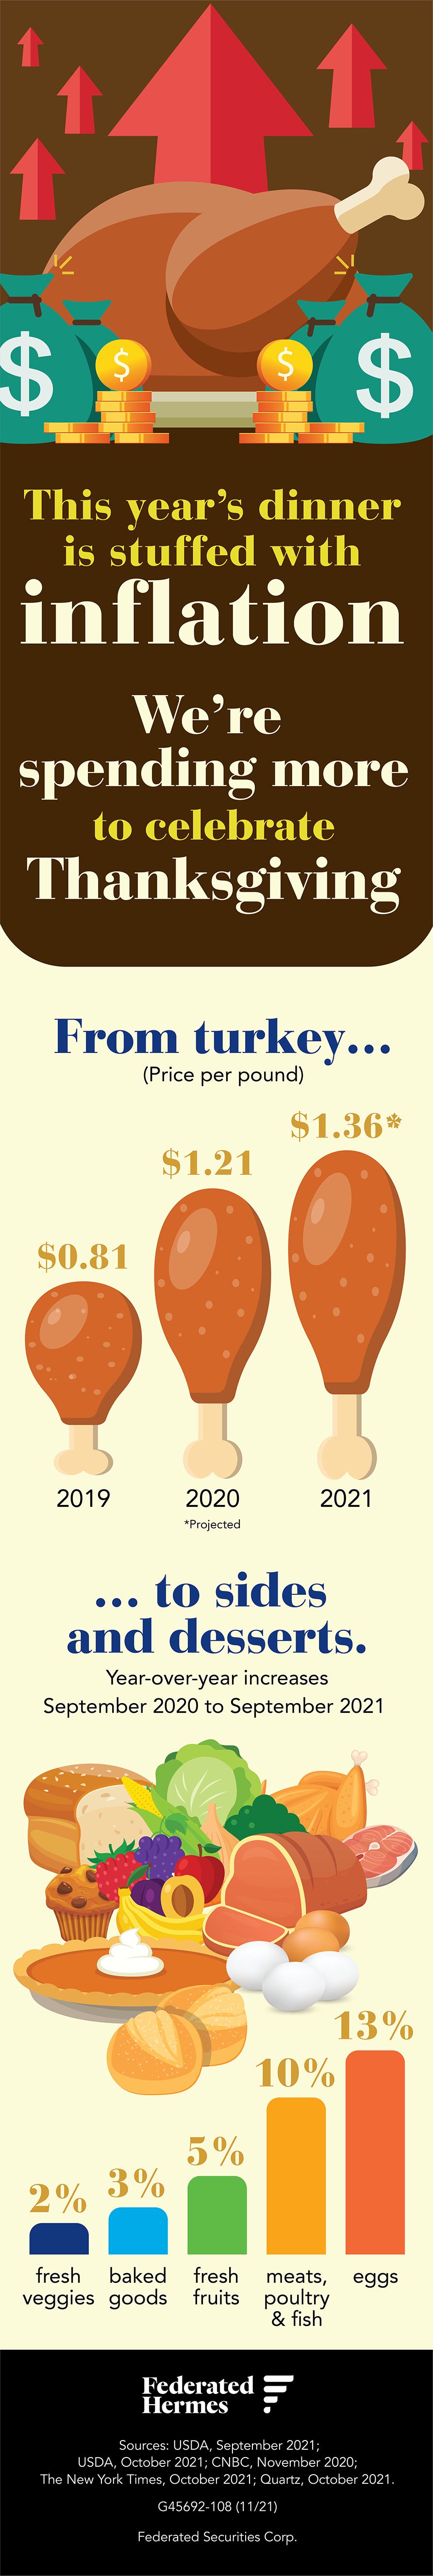 Thanksgiving Dinner Infographic alt text Title: This year’s Thanksgiving dinner is stuffed with inflation Published: November 18, 2021 This year’s dinner is stuffed with inflation. We’re spending more to celebrate Thanksgiving. From turkey… The price of turkey is gradually increasing. In 2019, a turkey cost $0.81 per pound. The price of turkey increased in 2020, costing $1.21 per pound. The price of turkey is projected to increase again to a projected $1.36 per pound in 2021. … to sides and desserts. While turkey is increasing, the sides and deserts are also increasing. From September 2020 to September 2021: there was a 2% increase of fresh veggies. Baked goods had a 3% increase. Fresh fruits then increased by 5%. Meats, poultry, and fish increased by 10%. There was a 13% increase of eggs. Information sources: USDA, September 2021; USDA, October 2021; CNBC, November 2020; The New York Times, October 2021; Quartz, October 2021. Infographic illustrating increasing price of turkey, sides and dessert. Data is directly reflected in associated text.